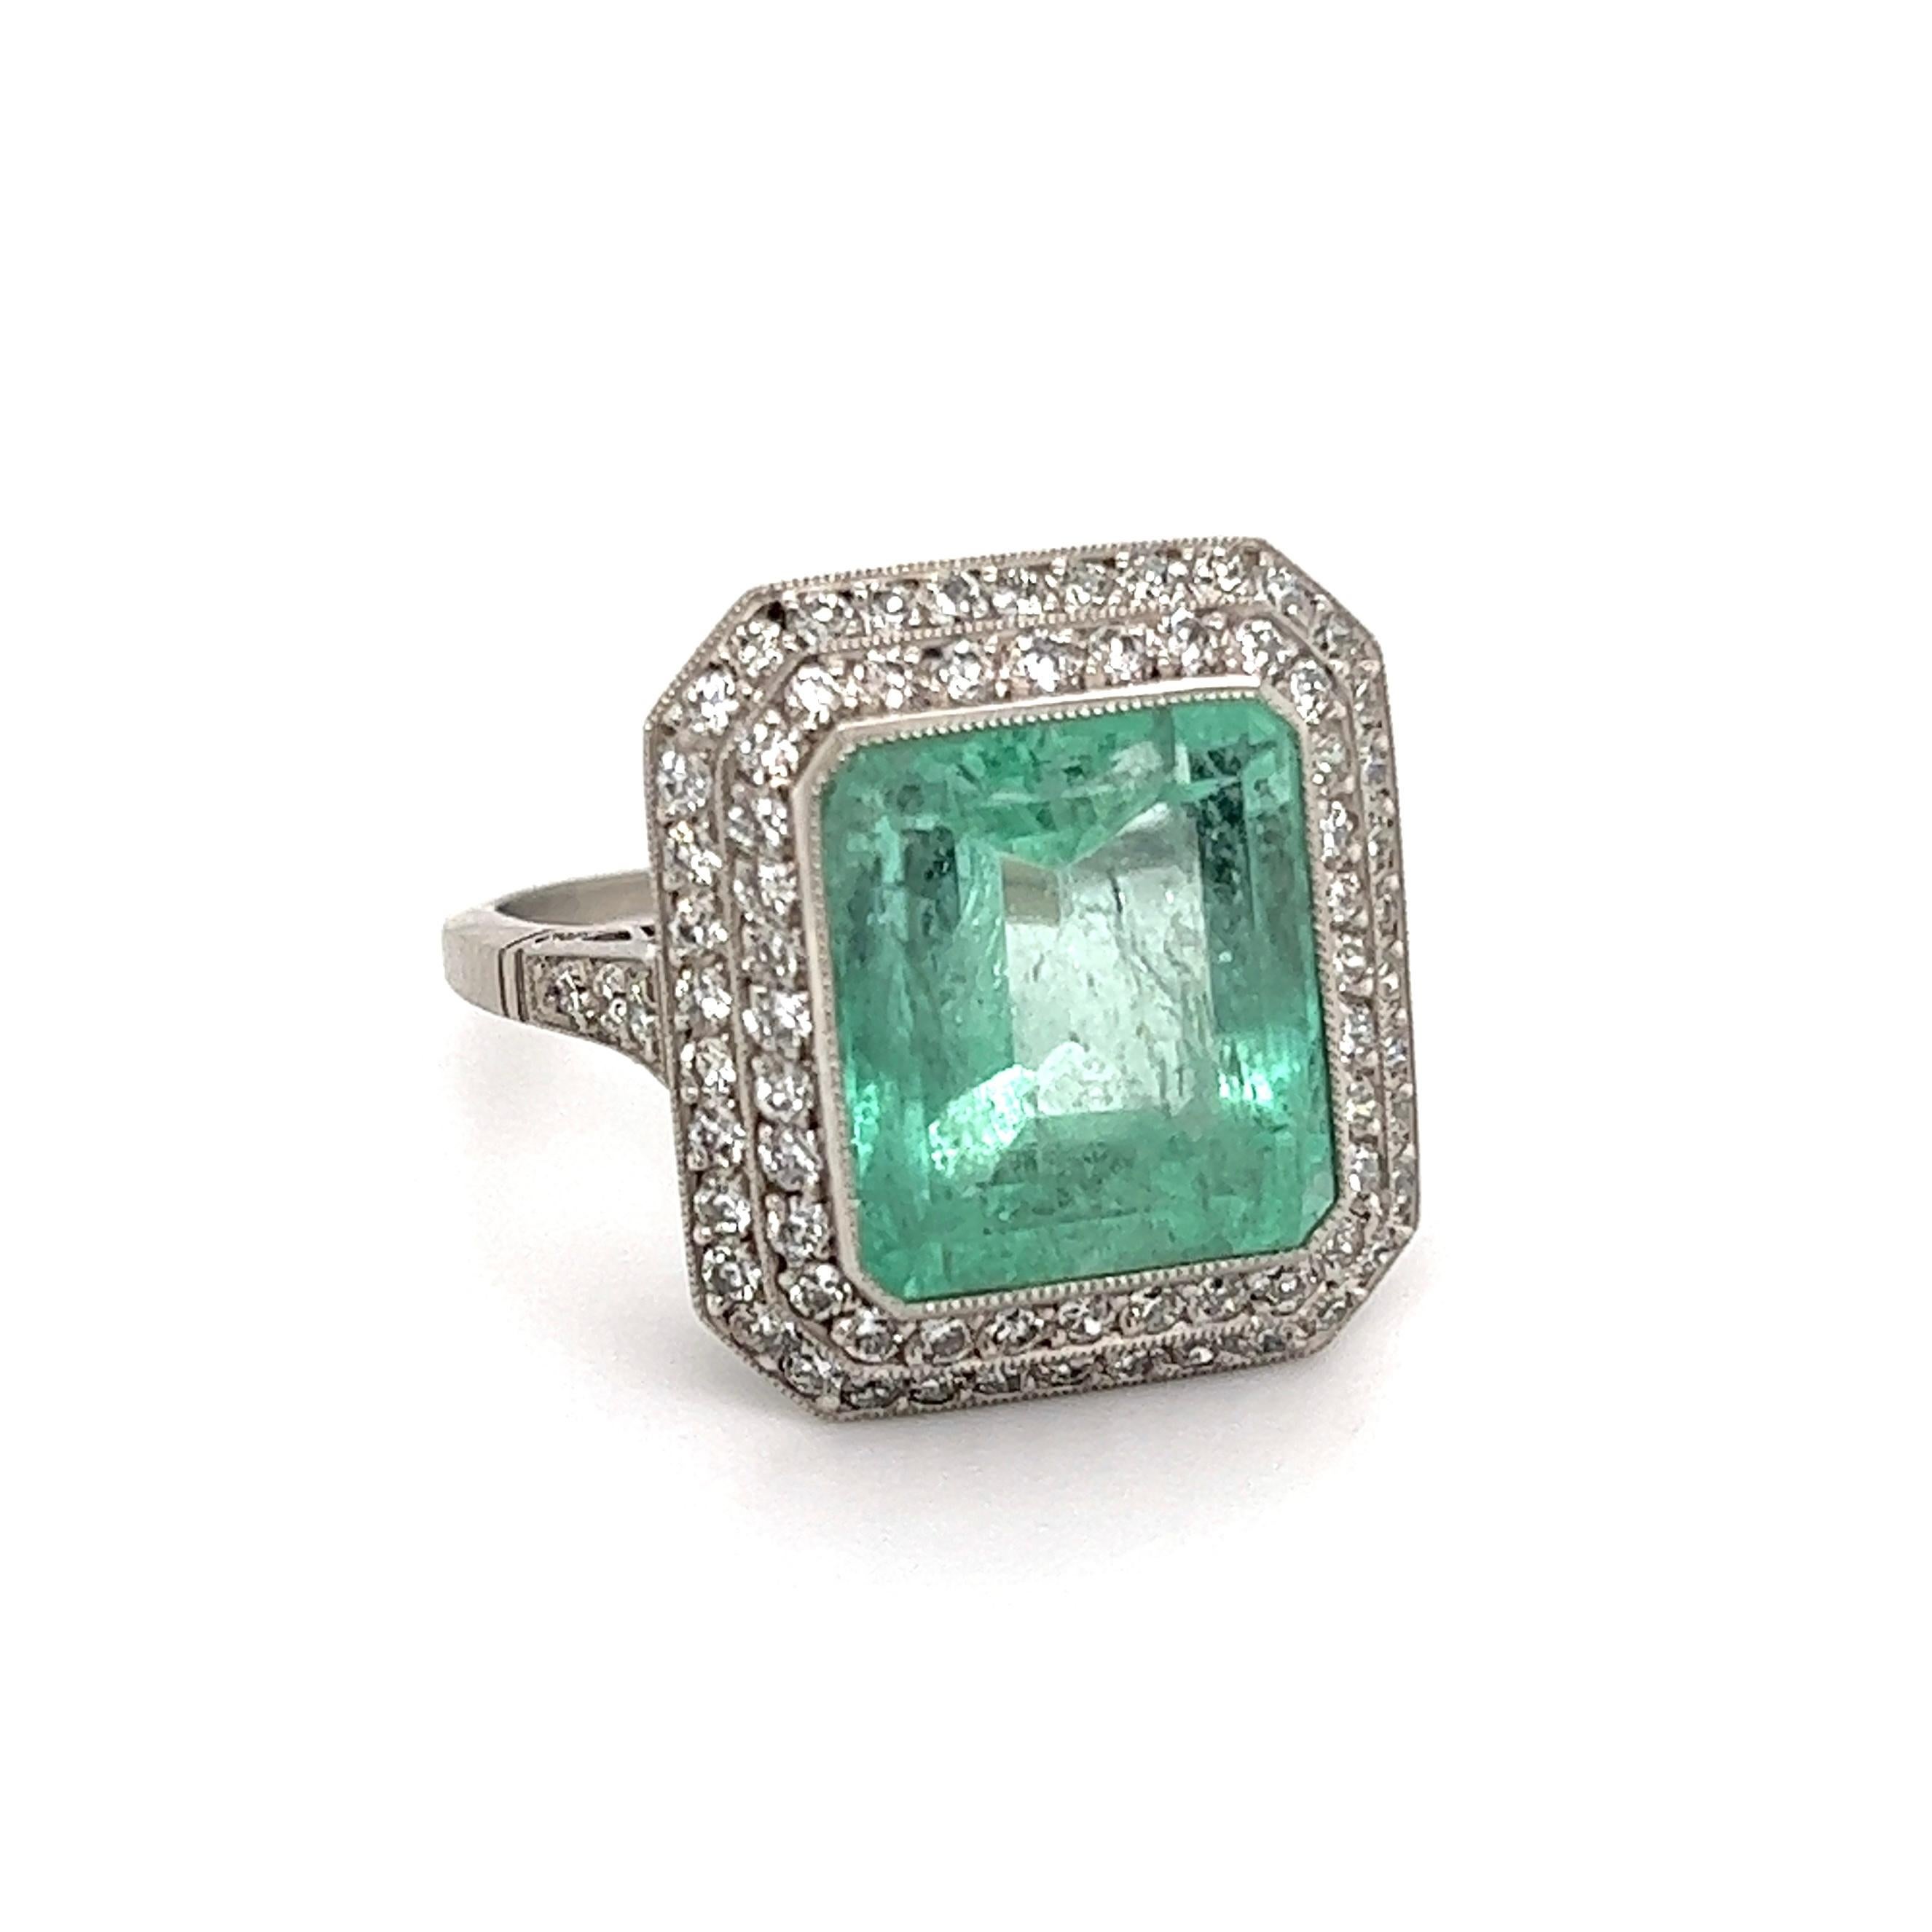 Simply Beautiful! Finely detailed Emerald and Diamond Vintage Platinum Ring. Centering a securely nestled 6.50 Carat Emerald, surrounded by 76 Old European Cut Diamonds weighing approx. 0.85tcw including 6 Diamonds, on shank. Approx. Dimensions